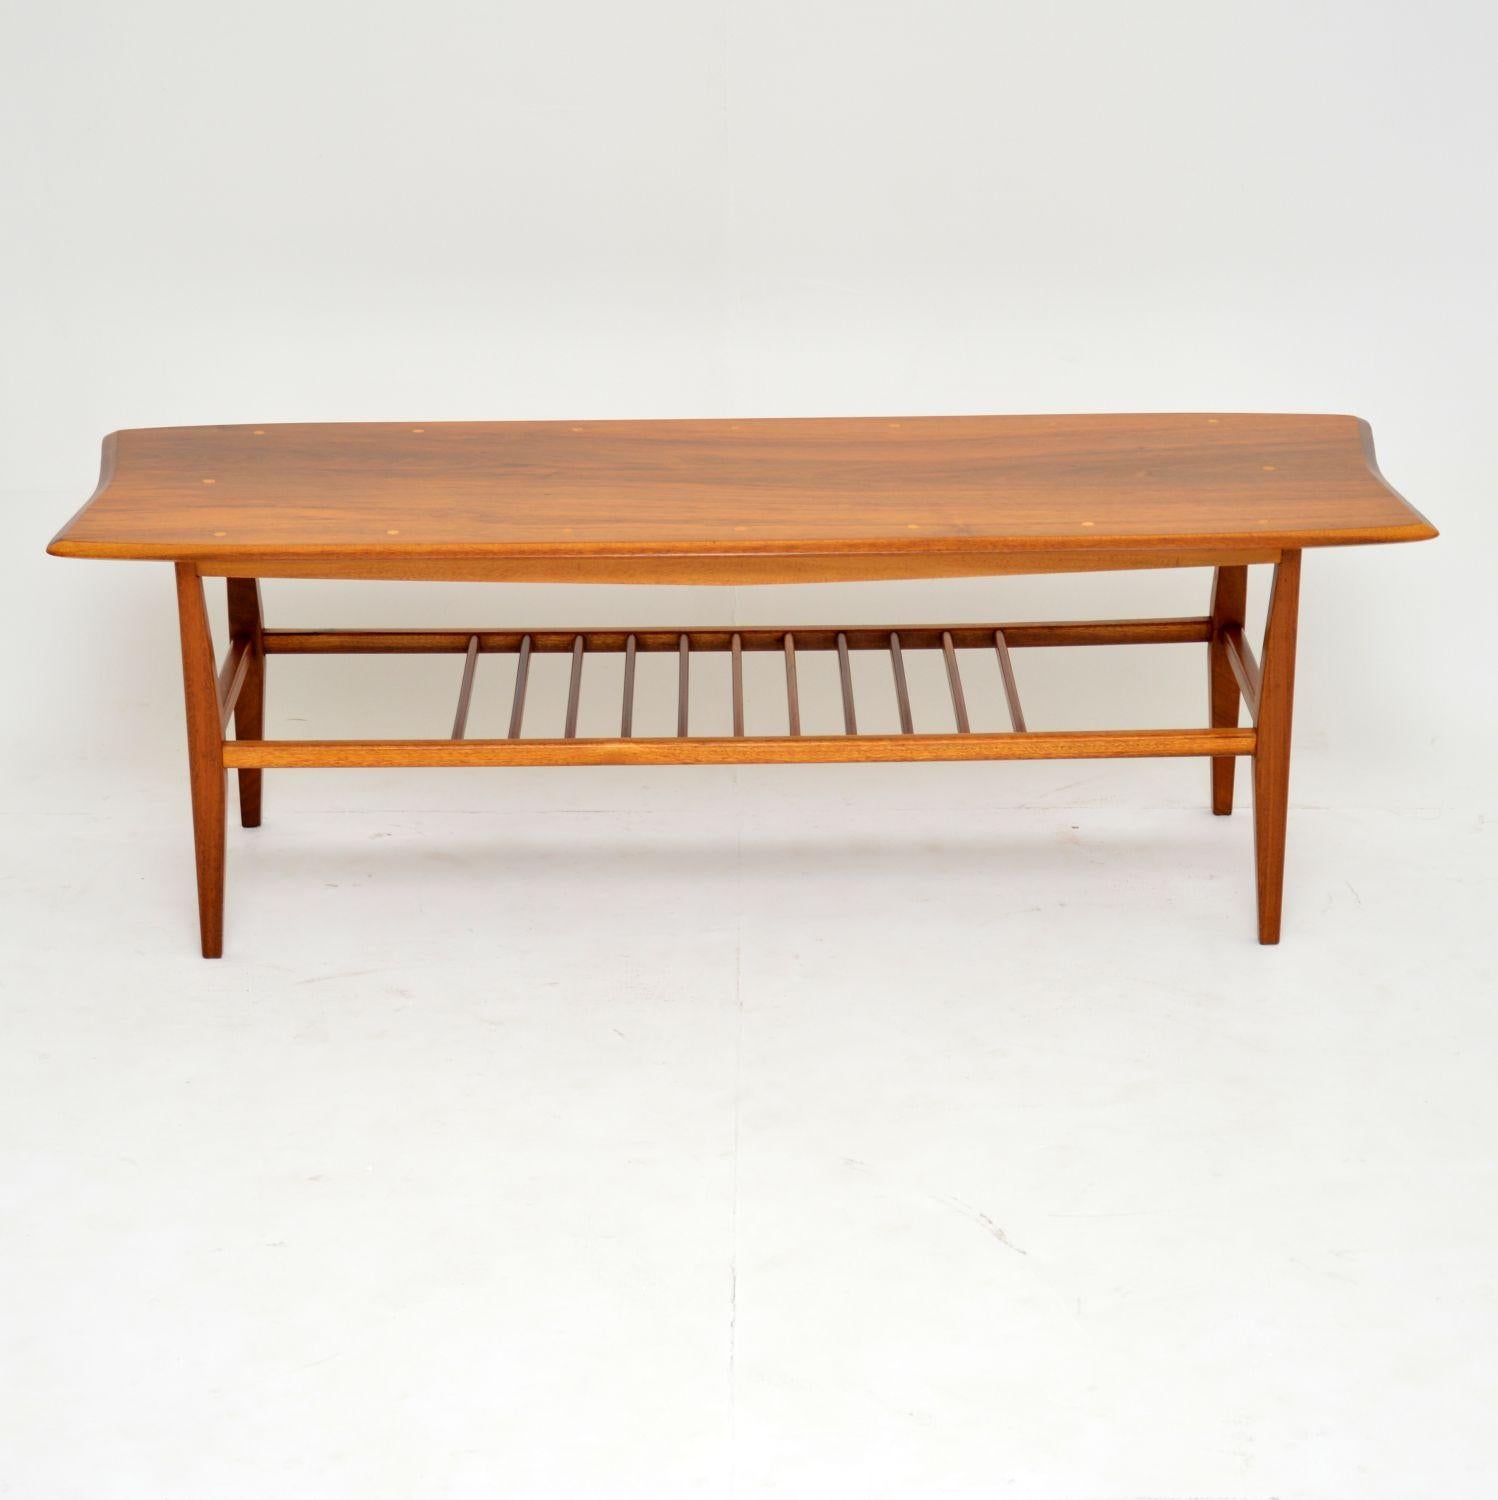 A beautifully styled and very well made coffee table in walnut. This dates from the 1960s, it was made in Britain. The walnut top has small inlaid circles of a lighter wood, possibly satin wood. This also has a useful lower tier. We have had this